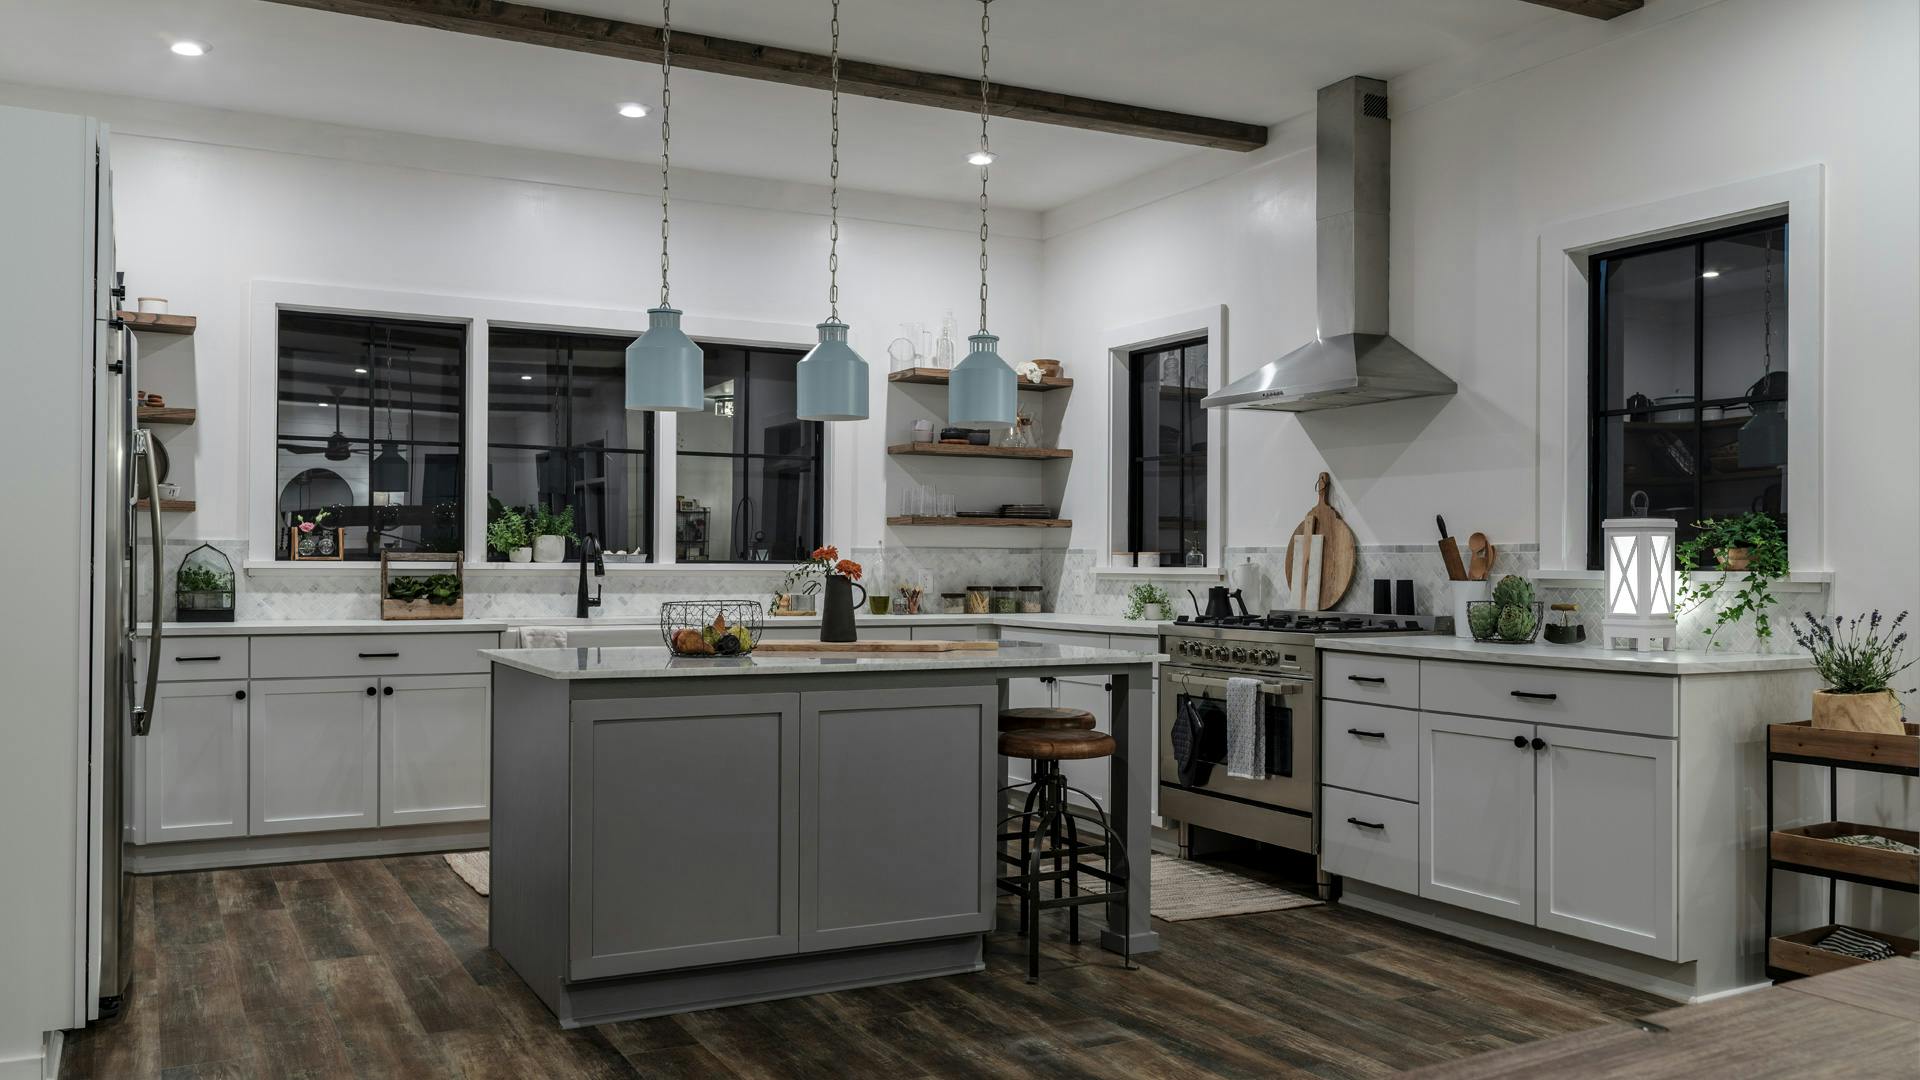 A kitchen with tape lights, shelf lighting, kicktoe lighting, and Montauk pendants, with just the downlights lights turned on at night